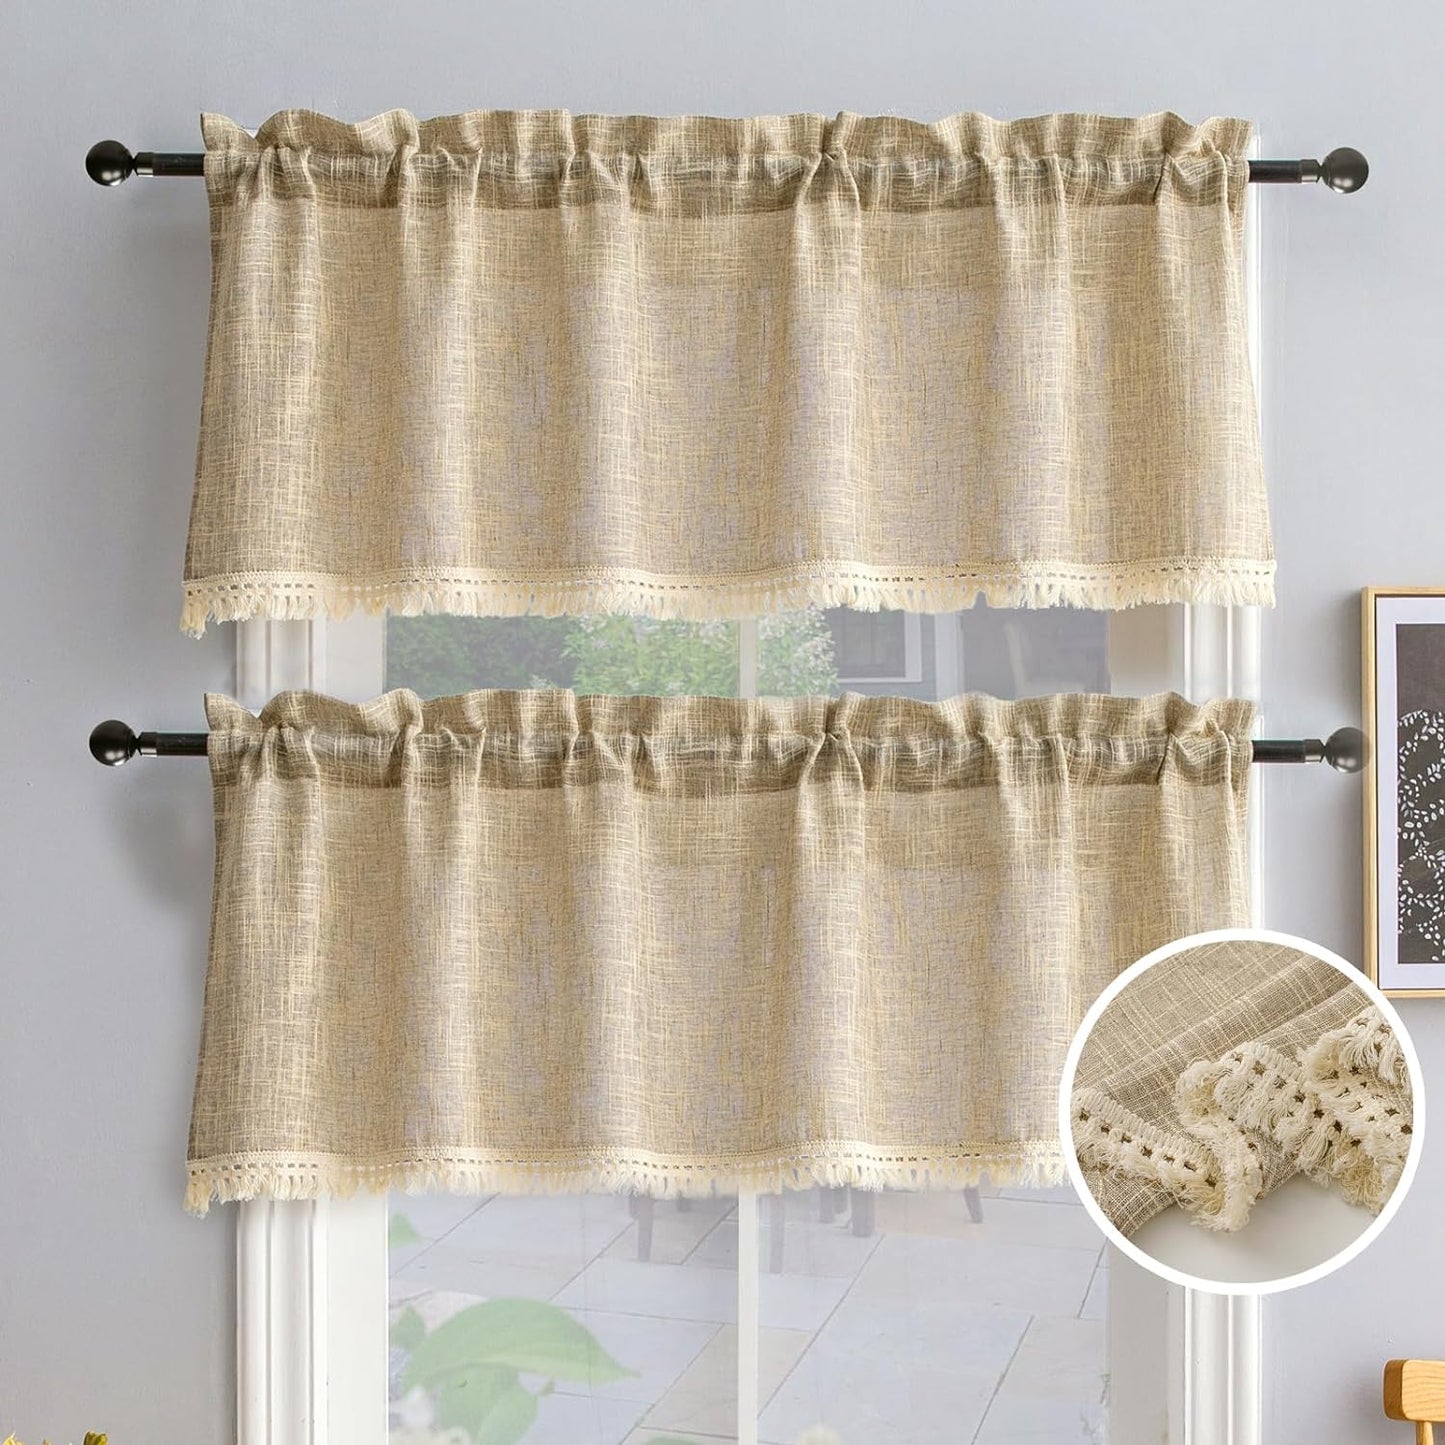 Beda Home Tassel Linen Textured Swag Curtain Valance for Farmhouses’ Kitchen; Light Filtering Rustic Short Swag Topper for Small Windows Bedroom Privacy Added Rod Pocket Design(Nature 36X63-2Pcs)  BD BEDA HOME Taupe 52Wx18L - 2 Pcs 